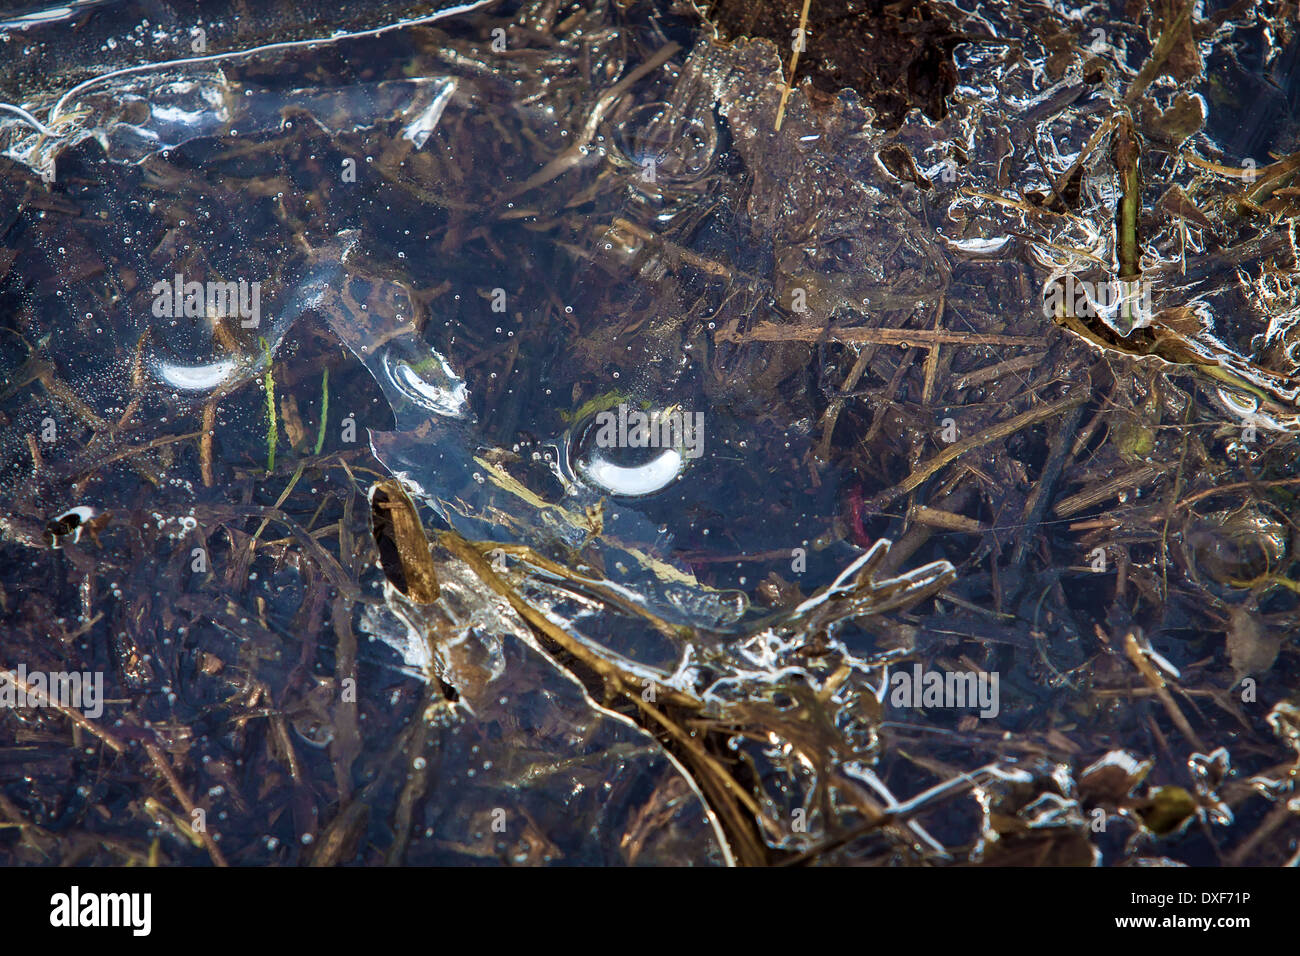 Grass, drops and abstract patterns in a frozen puddle Stock Photo